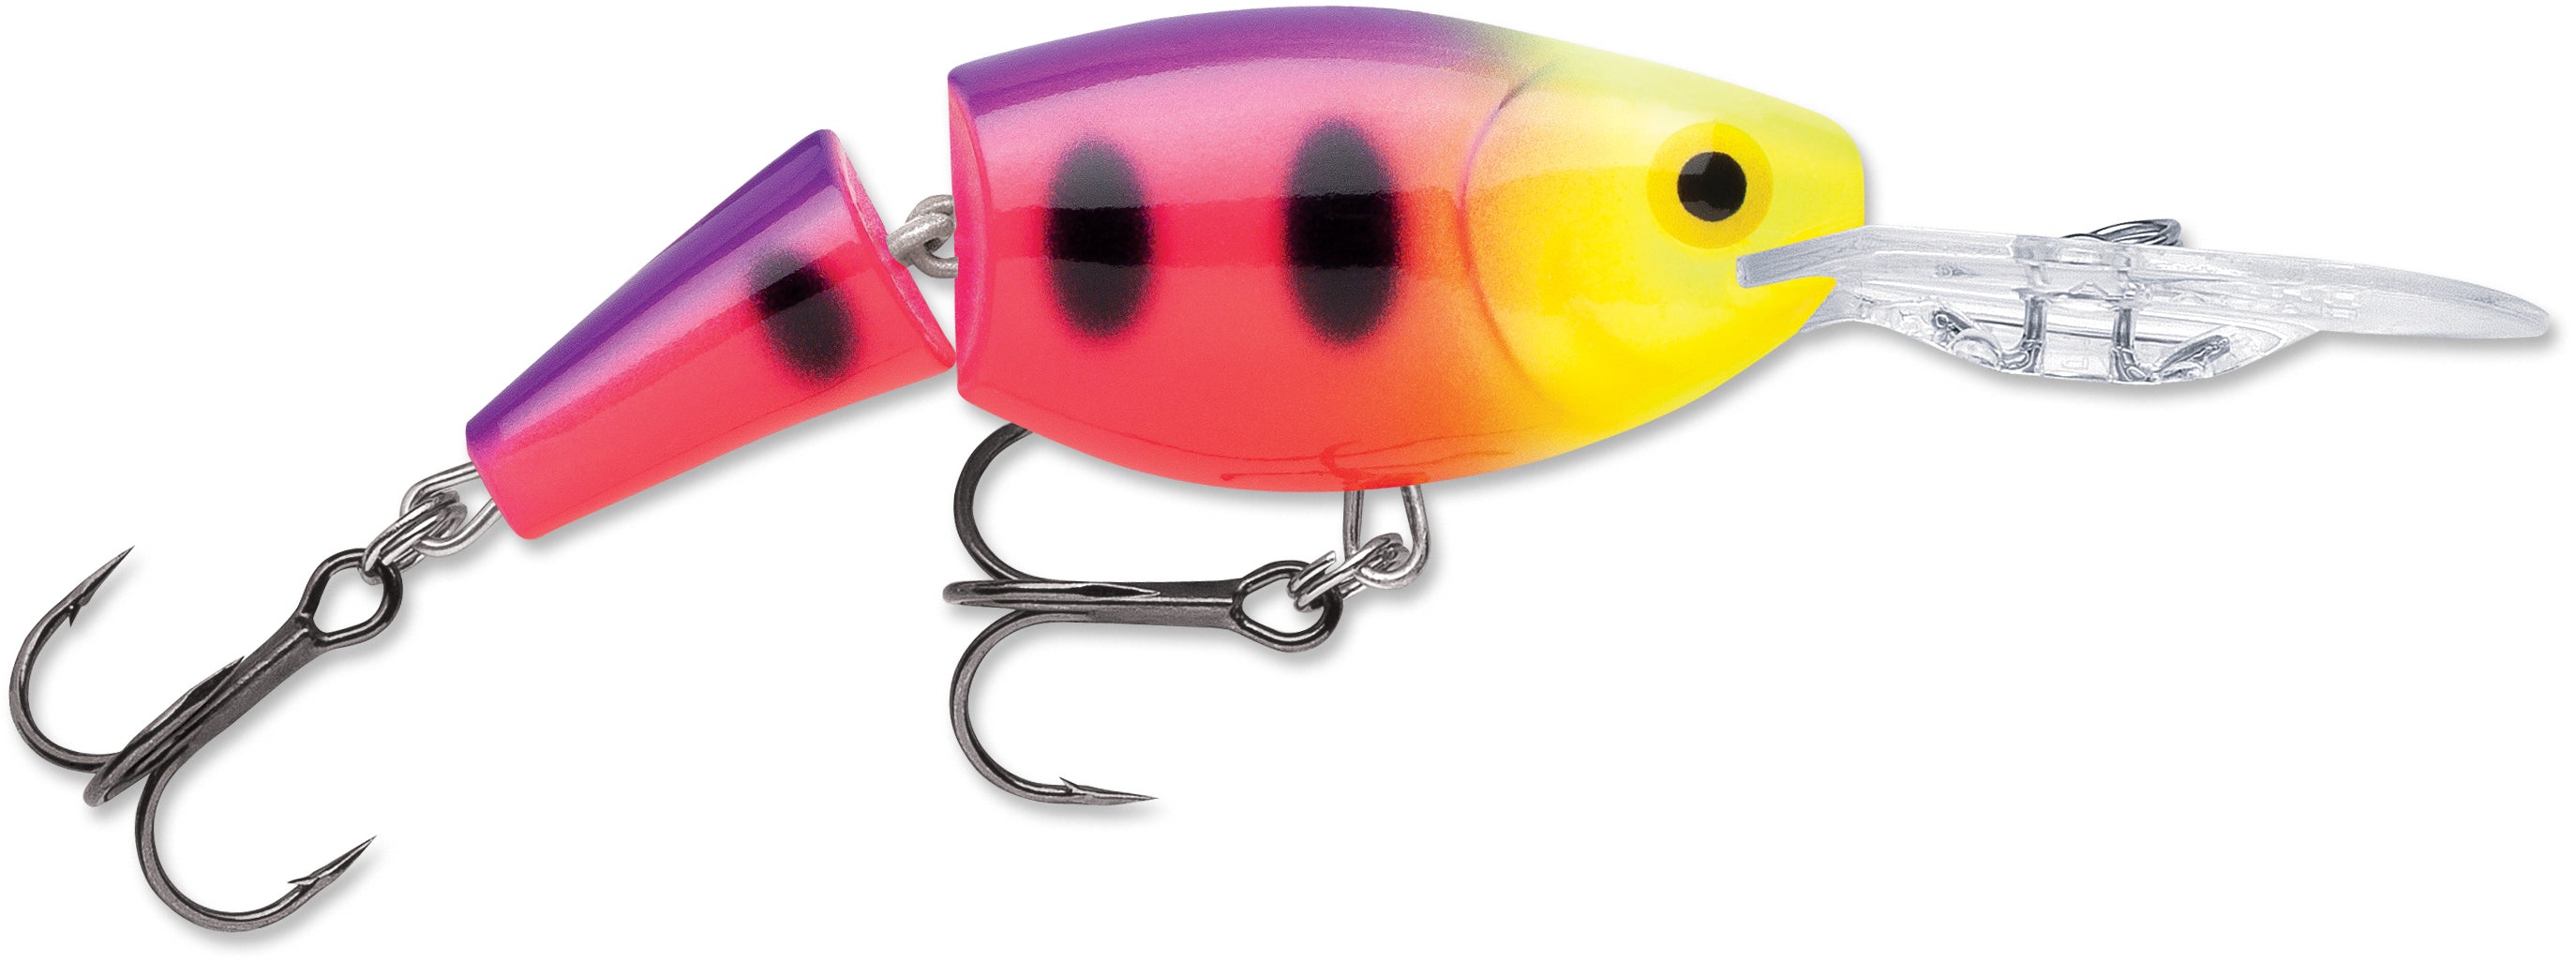 Lure Rapala Jointed Shad Rap 5 cm 8 gr - Nootica - Water addicts, like you!